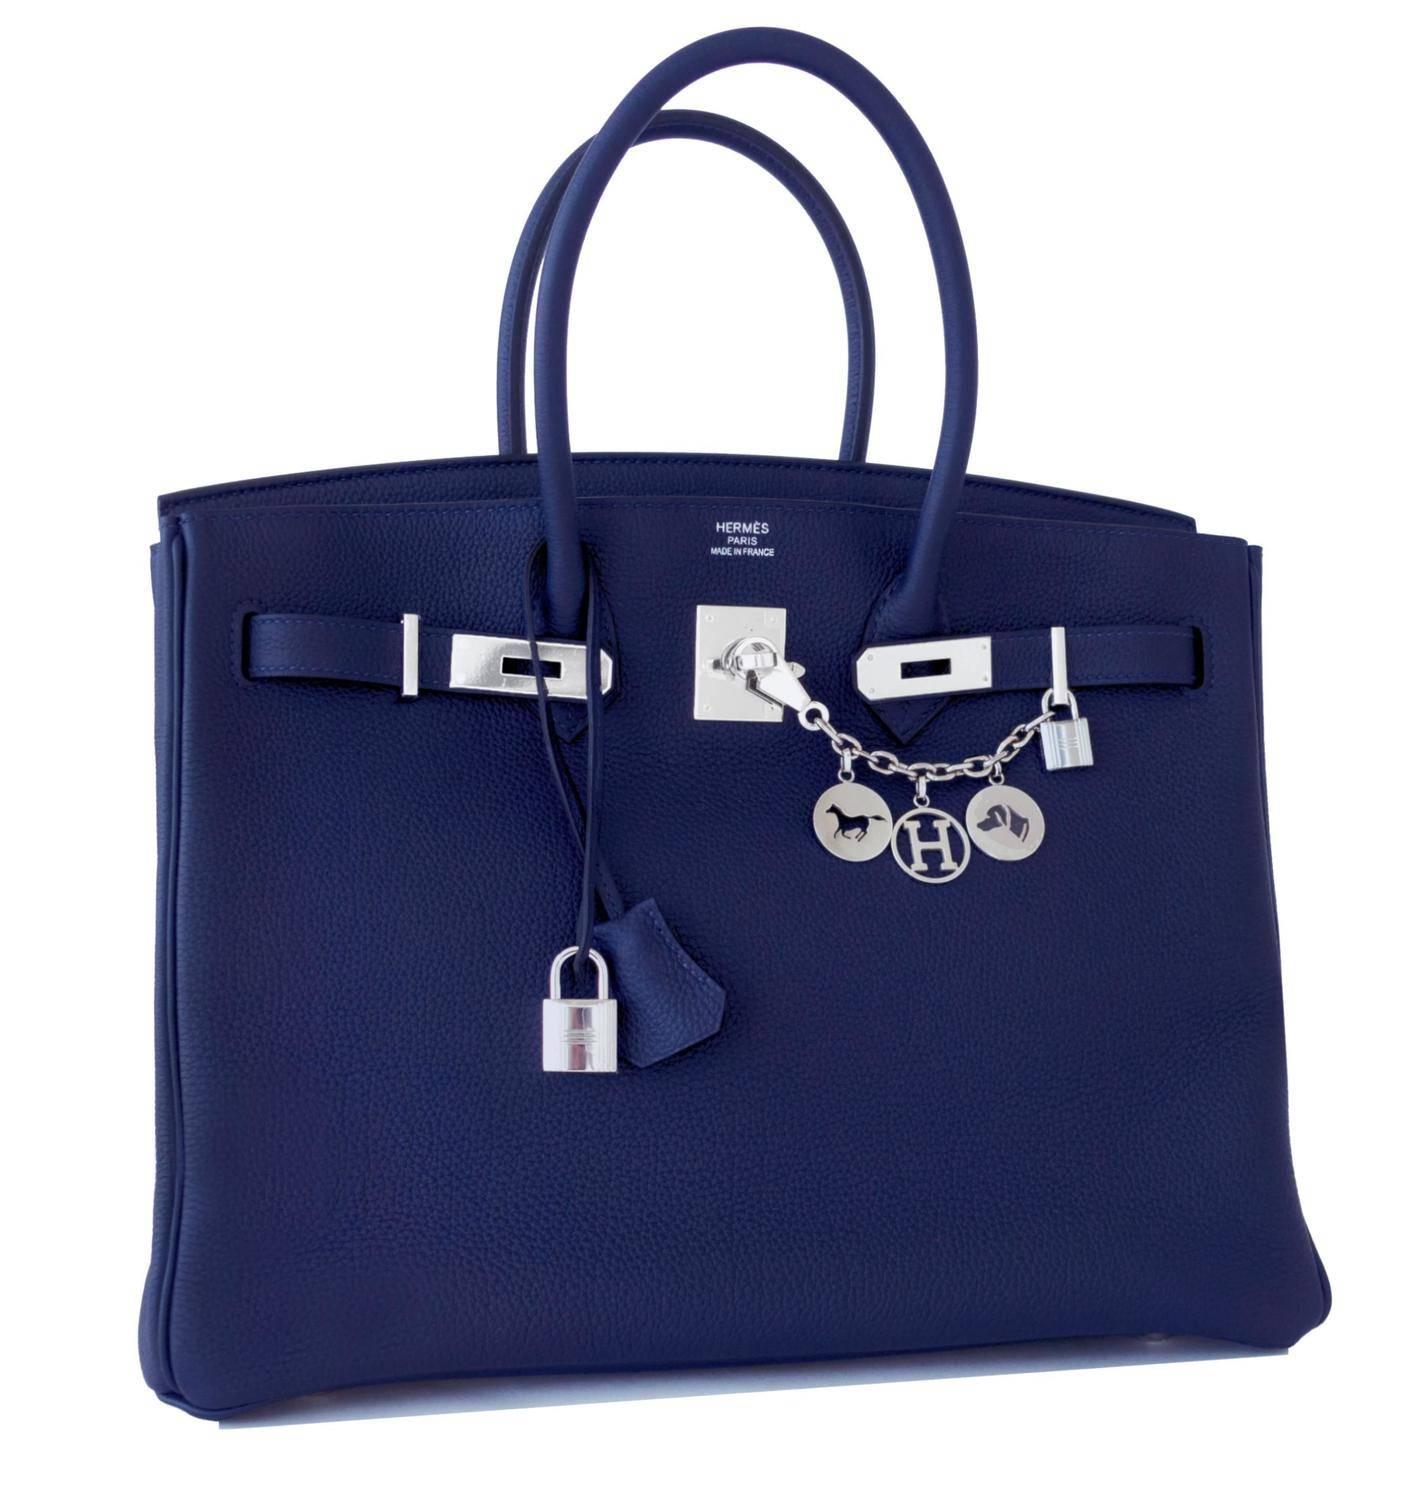 Hermes Navy Blue Nuit Togo 35cm Birkin Palladium Hardware Jewel Toned Navy
Store fresh. Pristine condition.  X interior stamp purchased from store in 2016 (with plastic on hardware). 
Perfect gift! Comes with keys, lock, clochette, a sleeper for